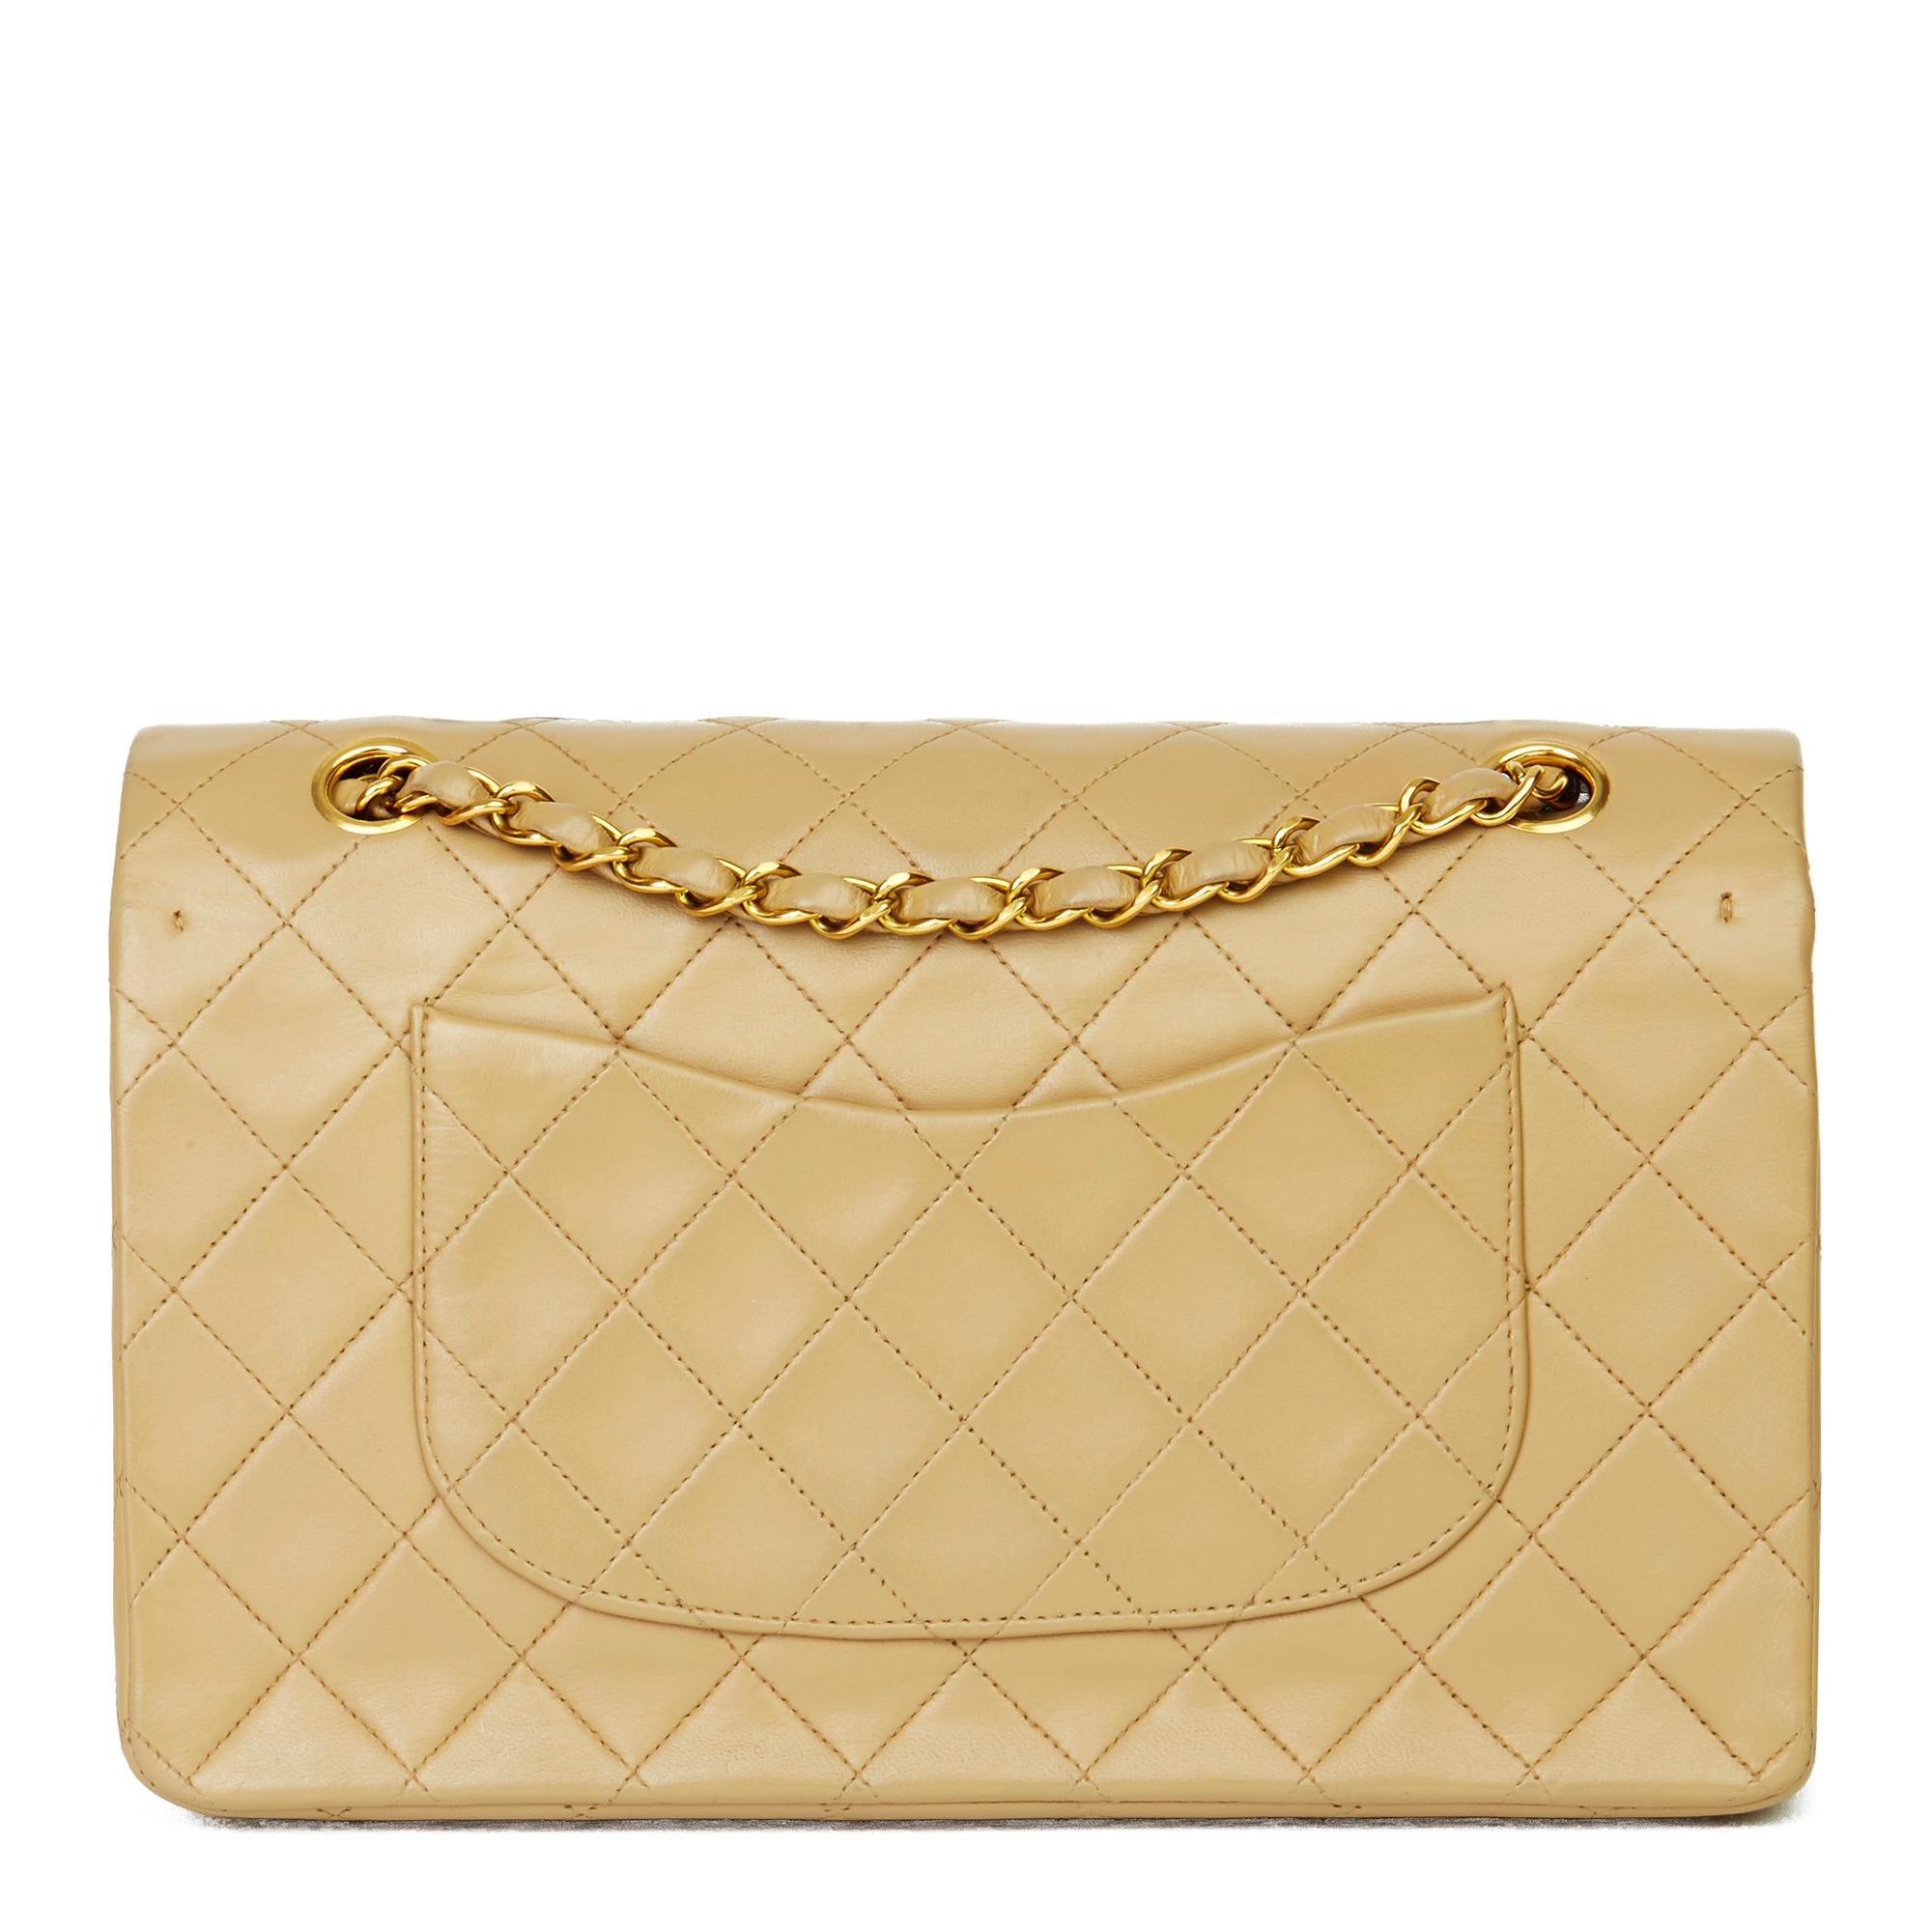 1996 Chanel Beige Quilted Lambskin Vintage Medium Classic Double Flap Bag  1